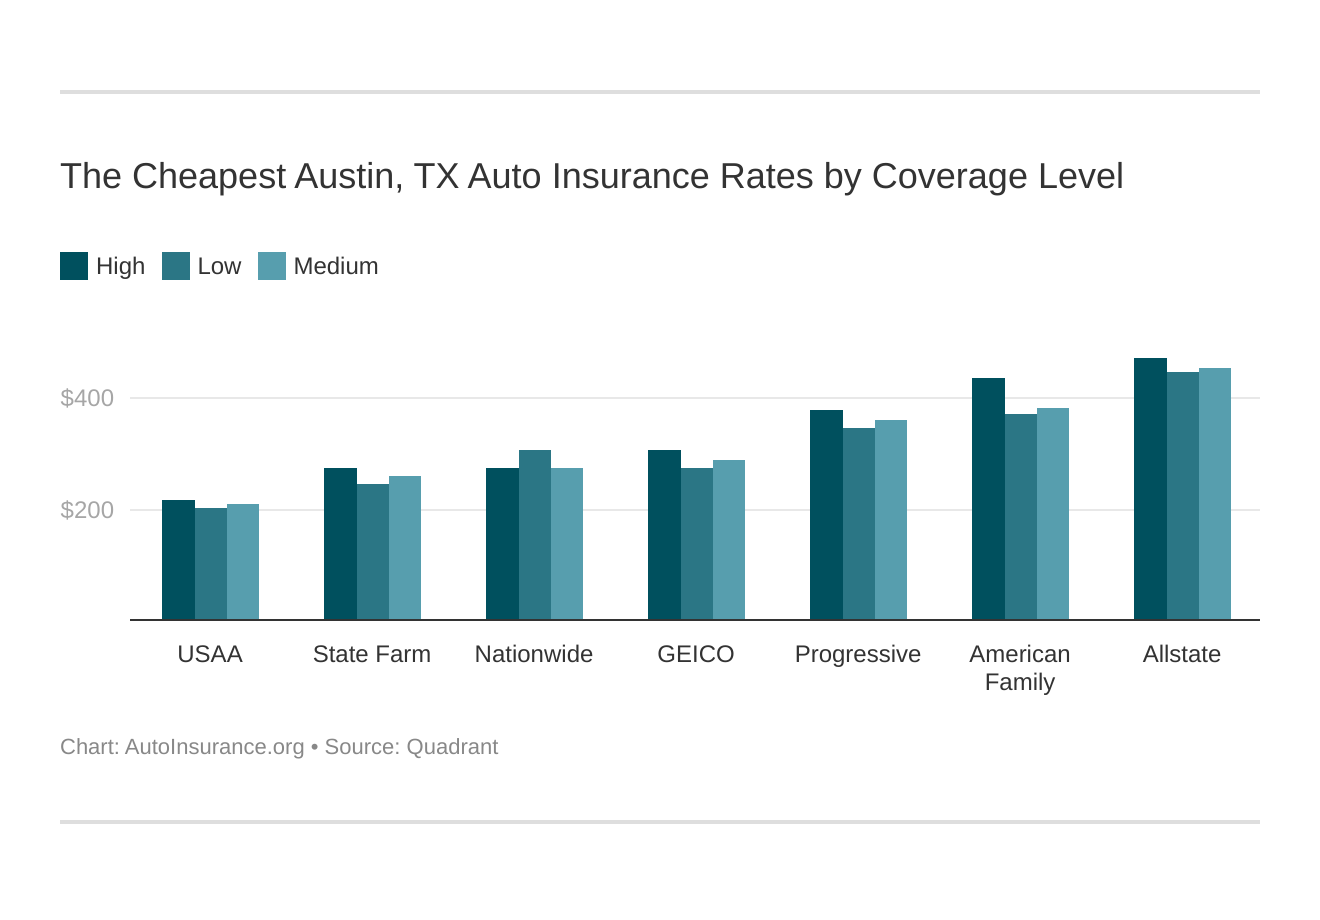 The Cheapest Austin, TX Auto Insurance Rates by Coverage Level